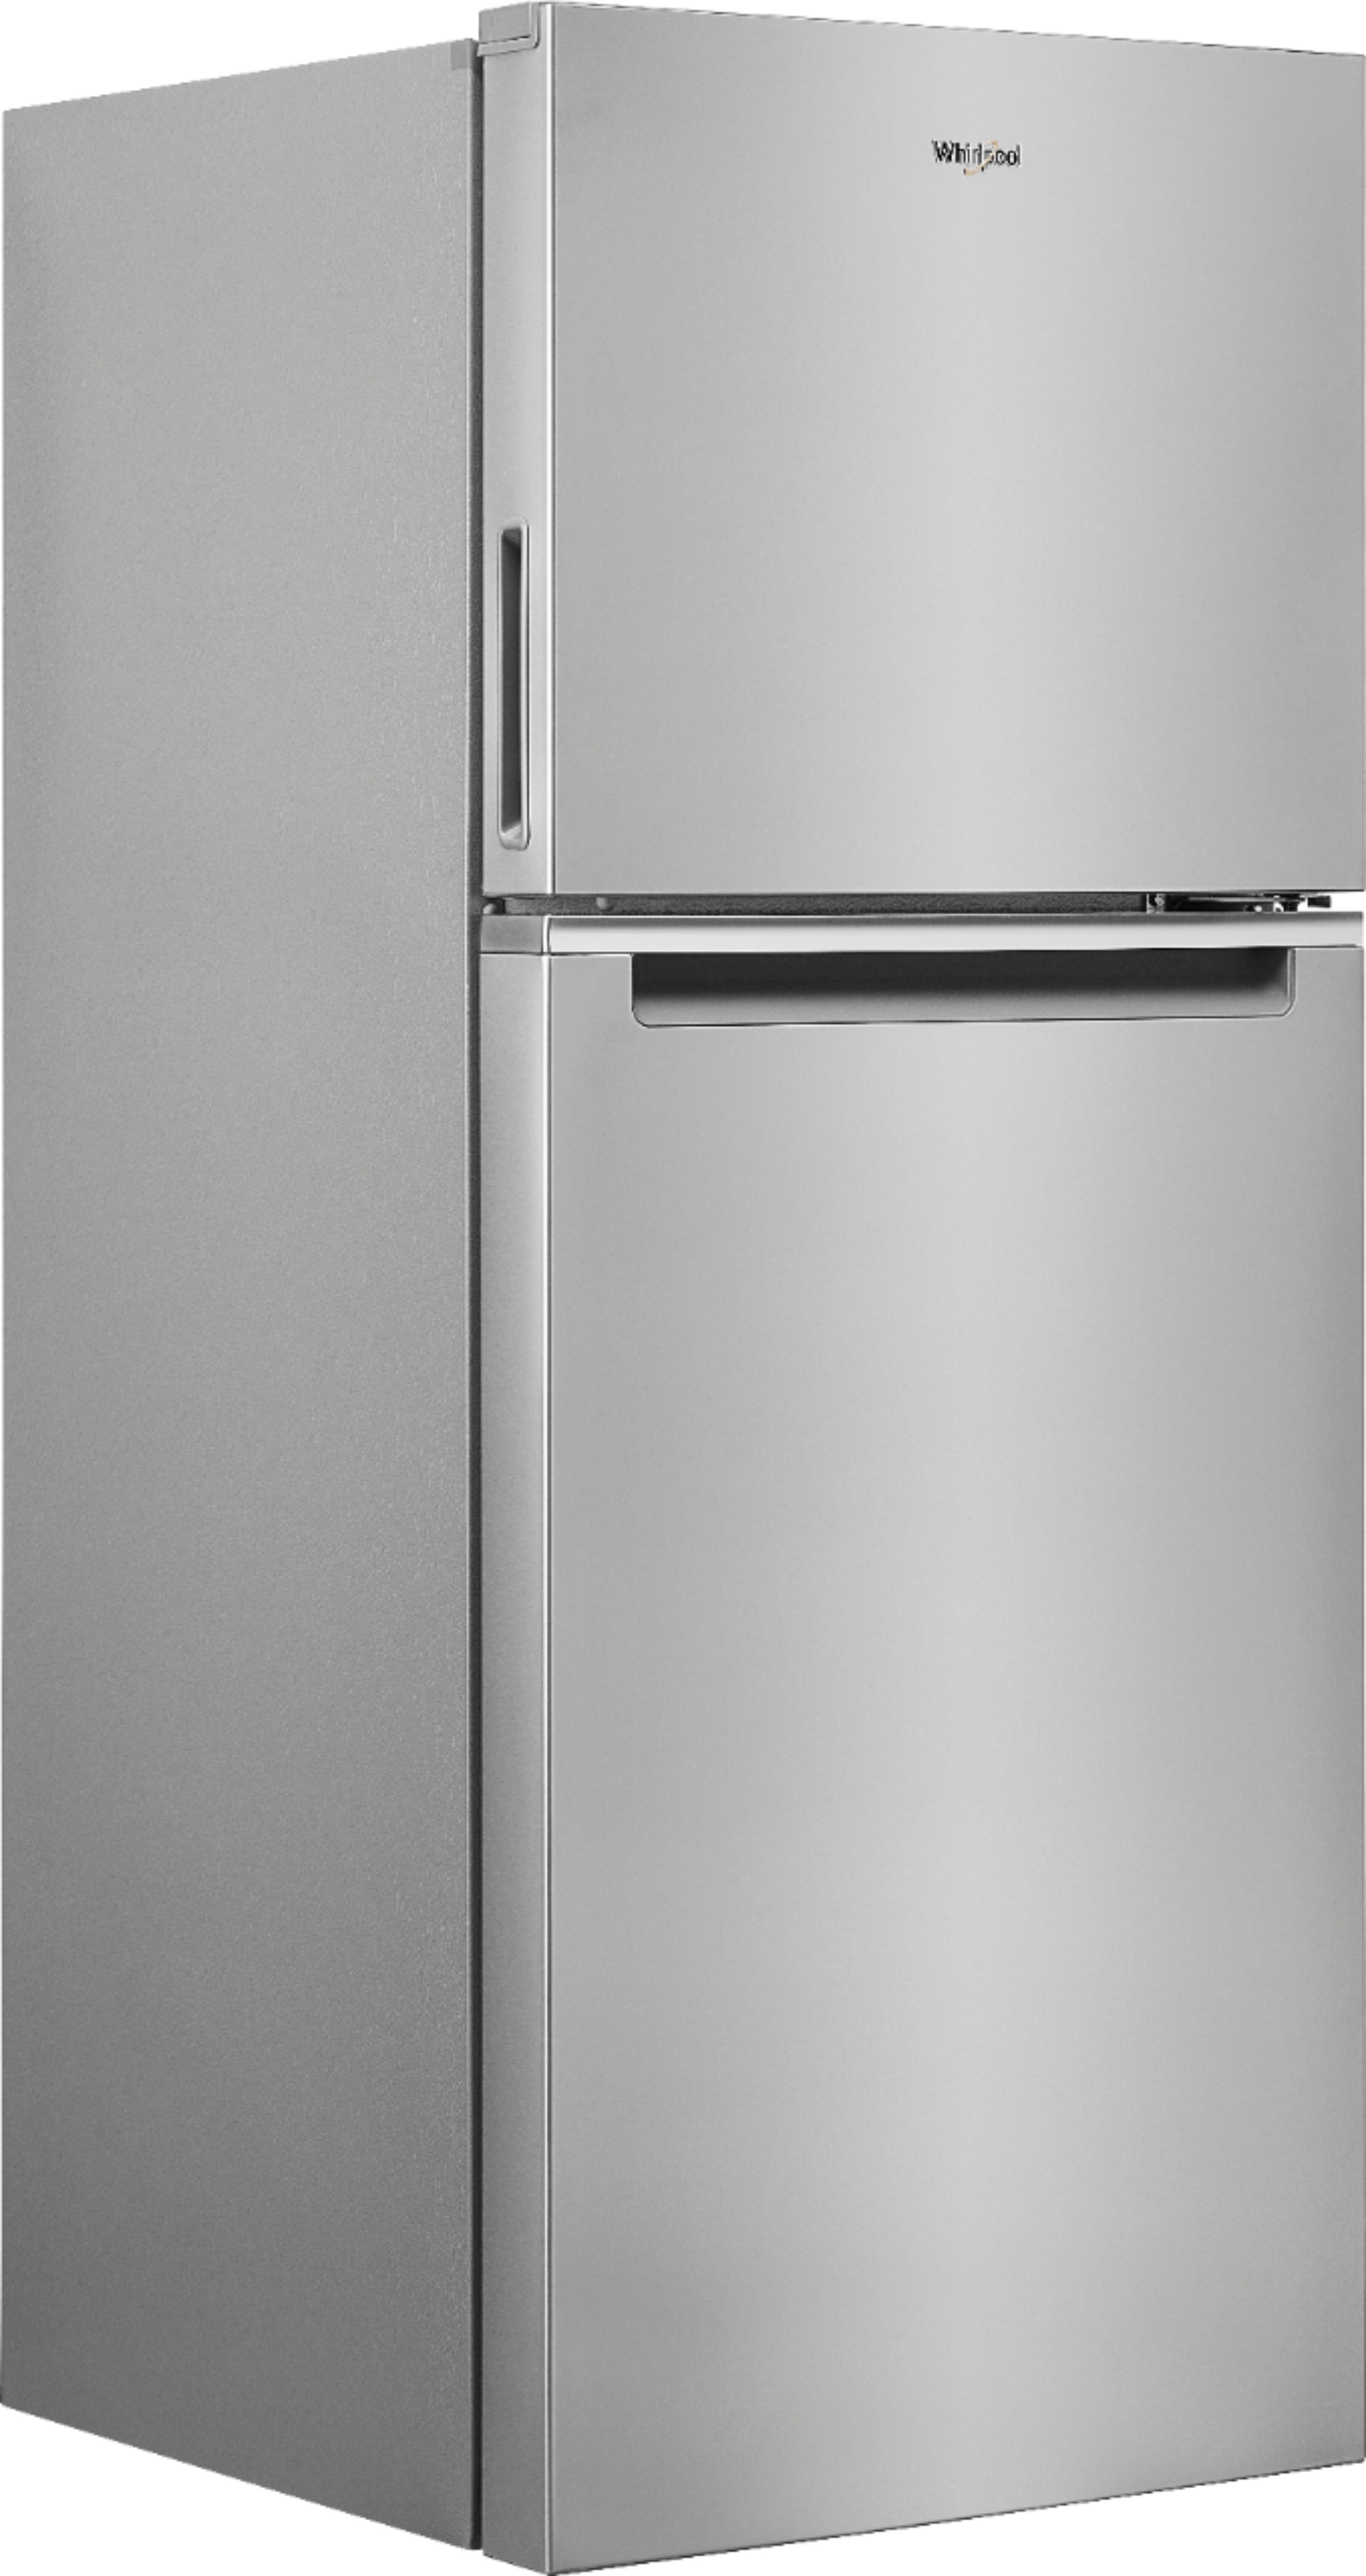 Angle View: Monogram - 23.1 Cu. Ft. French Door Counter-Depth Refrigerator - Stainless steel